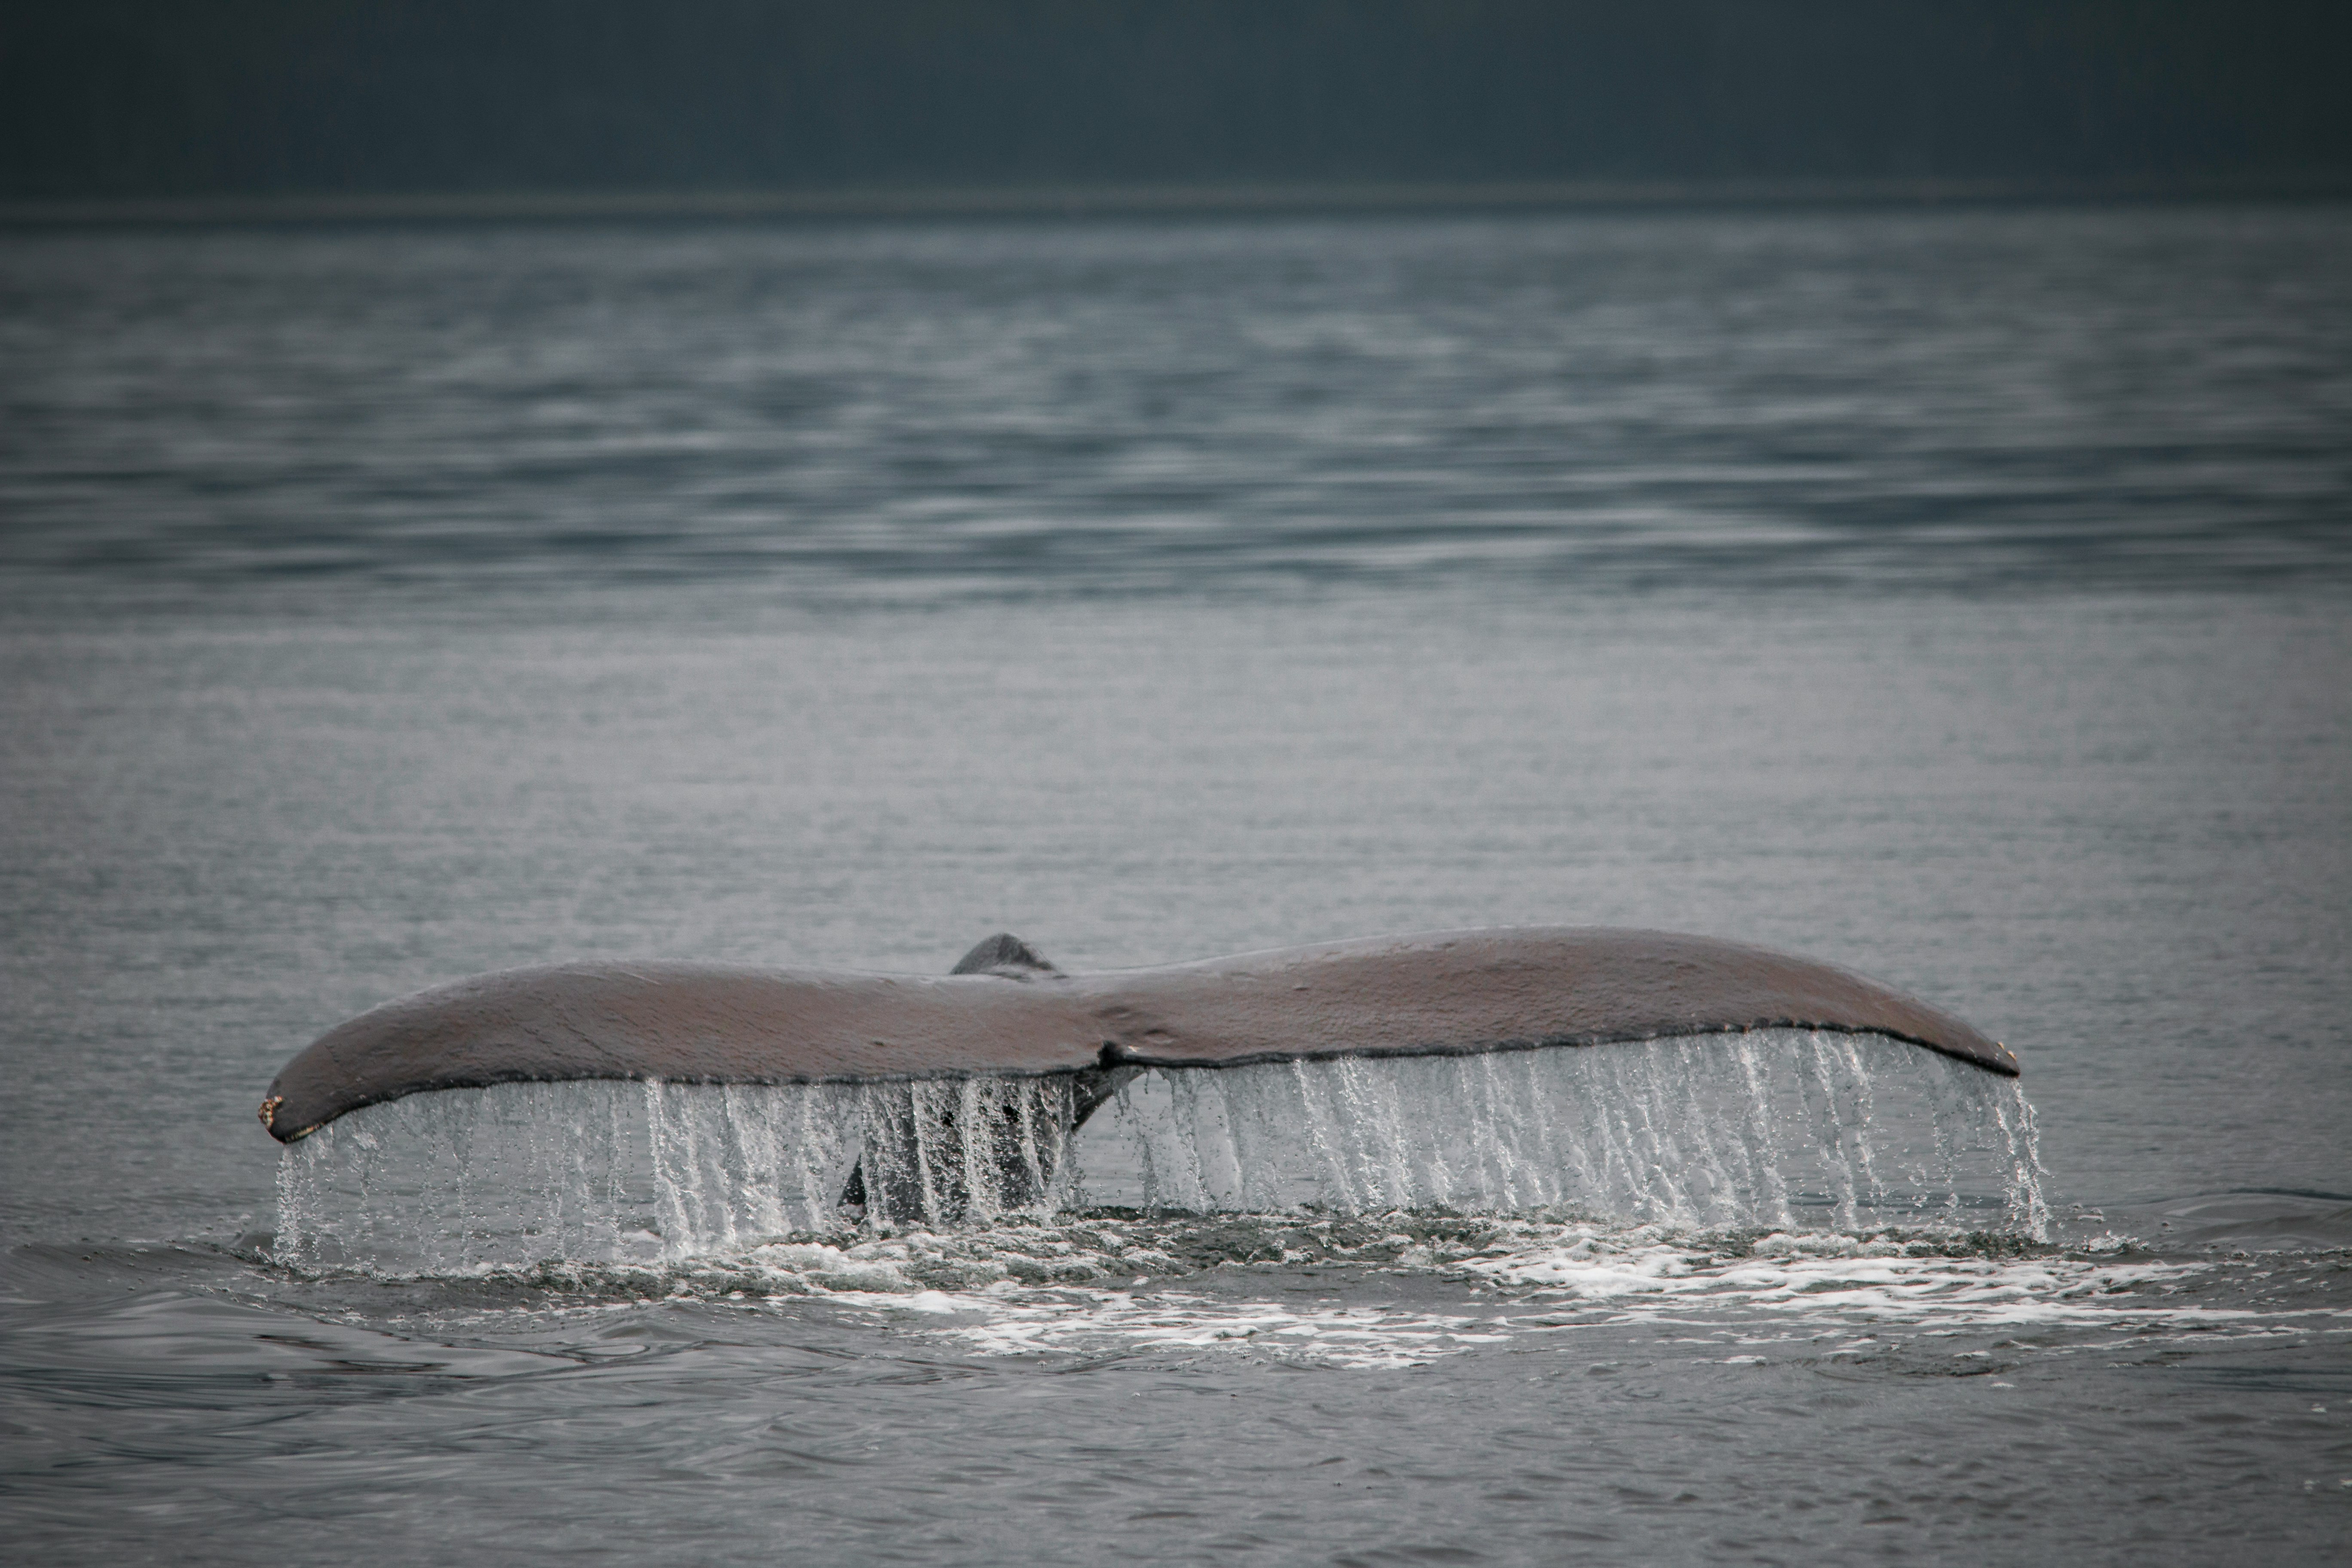 whale tail's showing above the sea